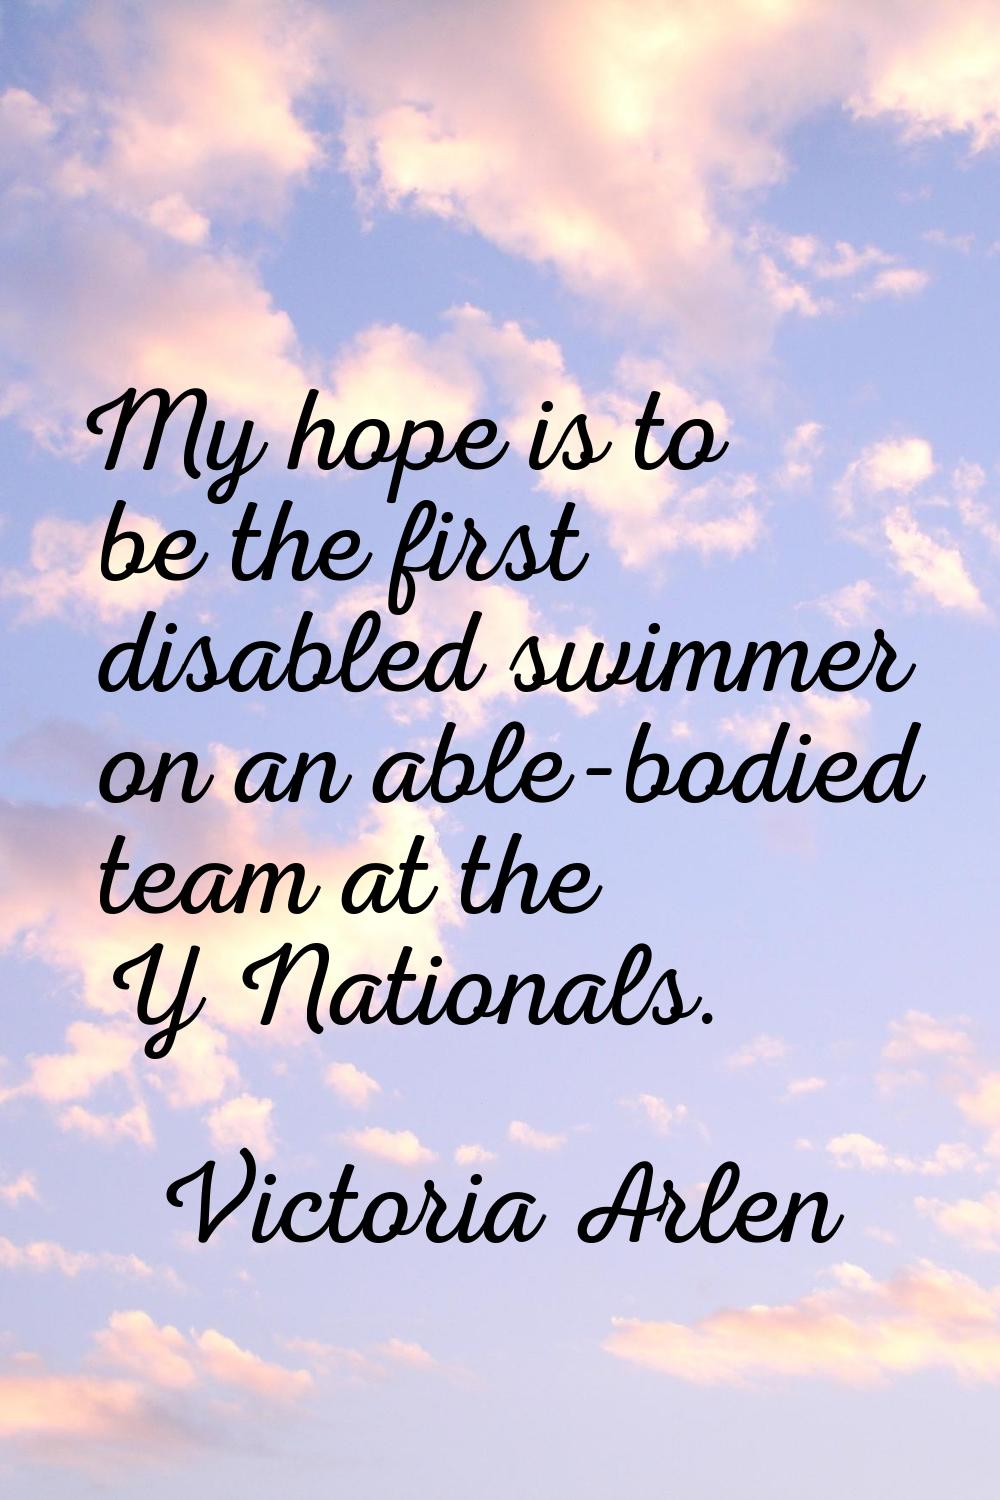 My hope is to be the first disabled swimmer on an able-bodied team at the Y Nationals.